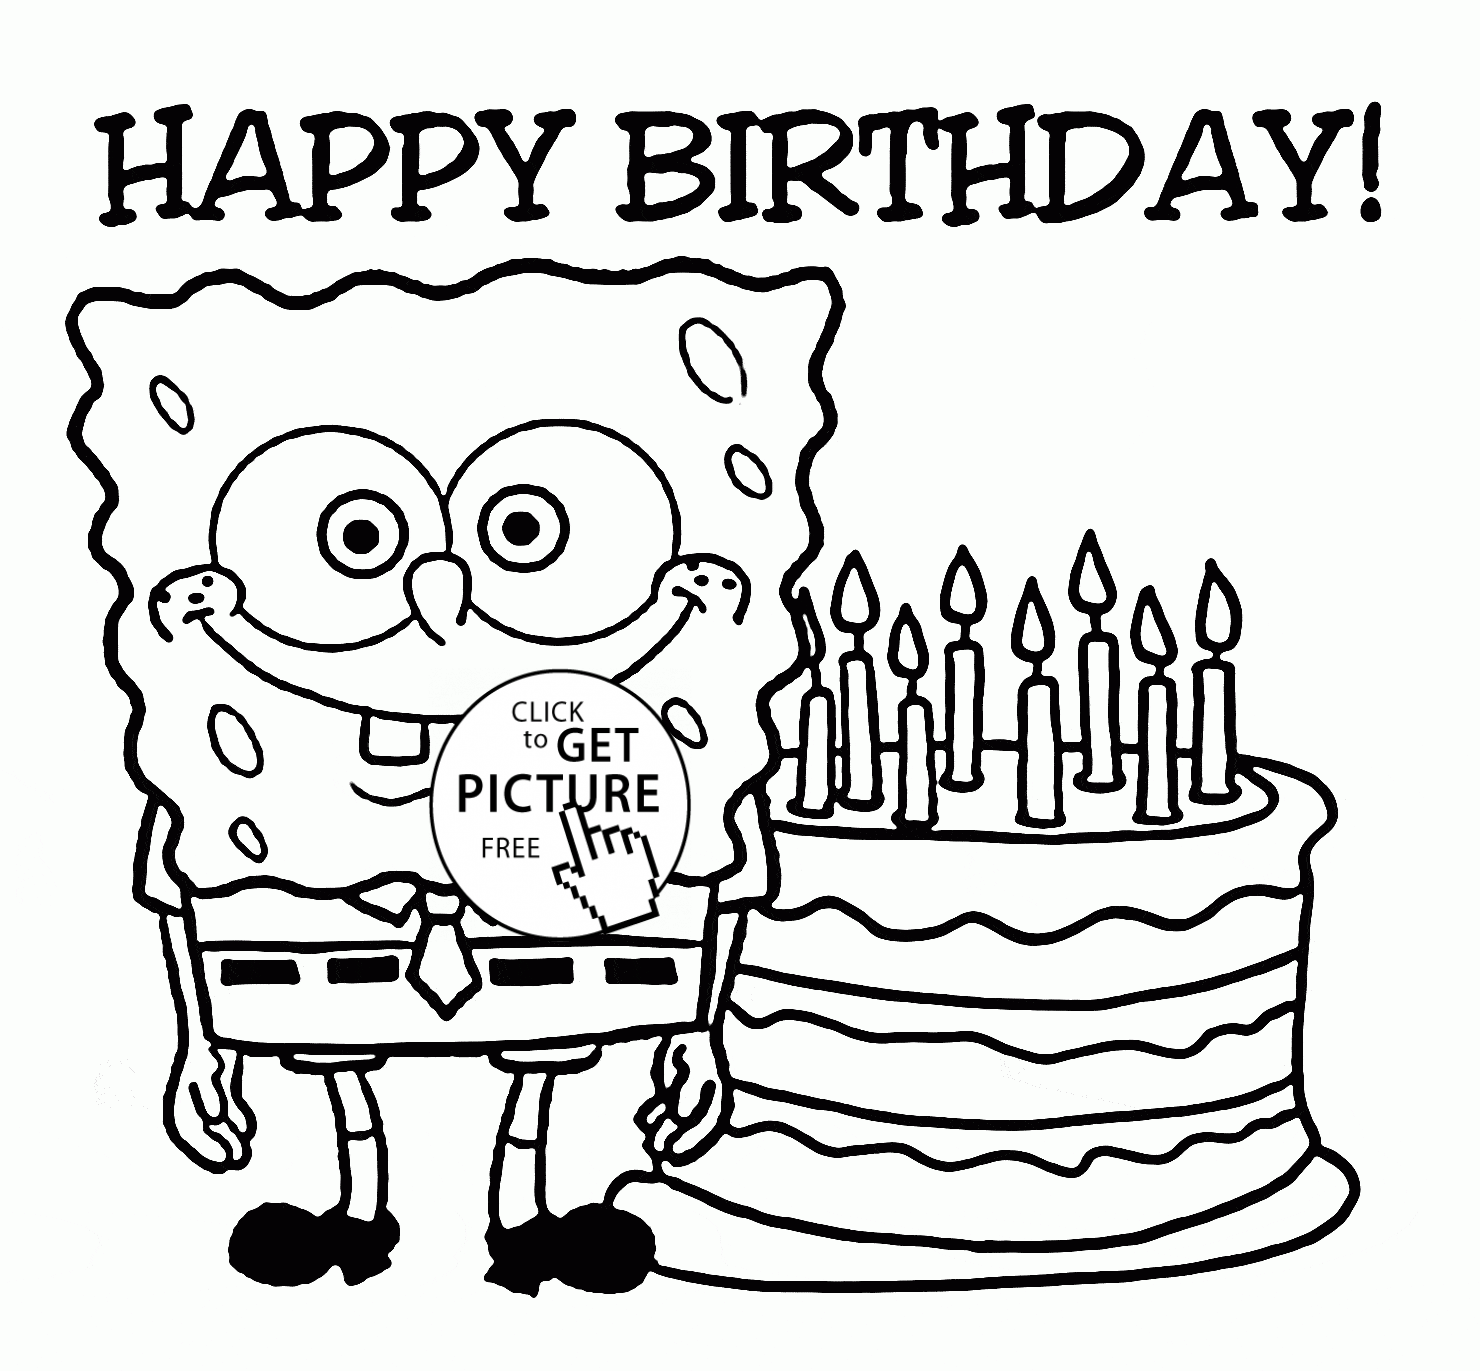 Happy Birthday Drawing Cards at GetDrawings Free download